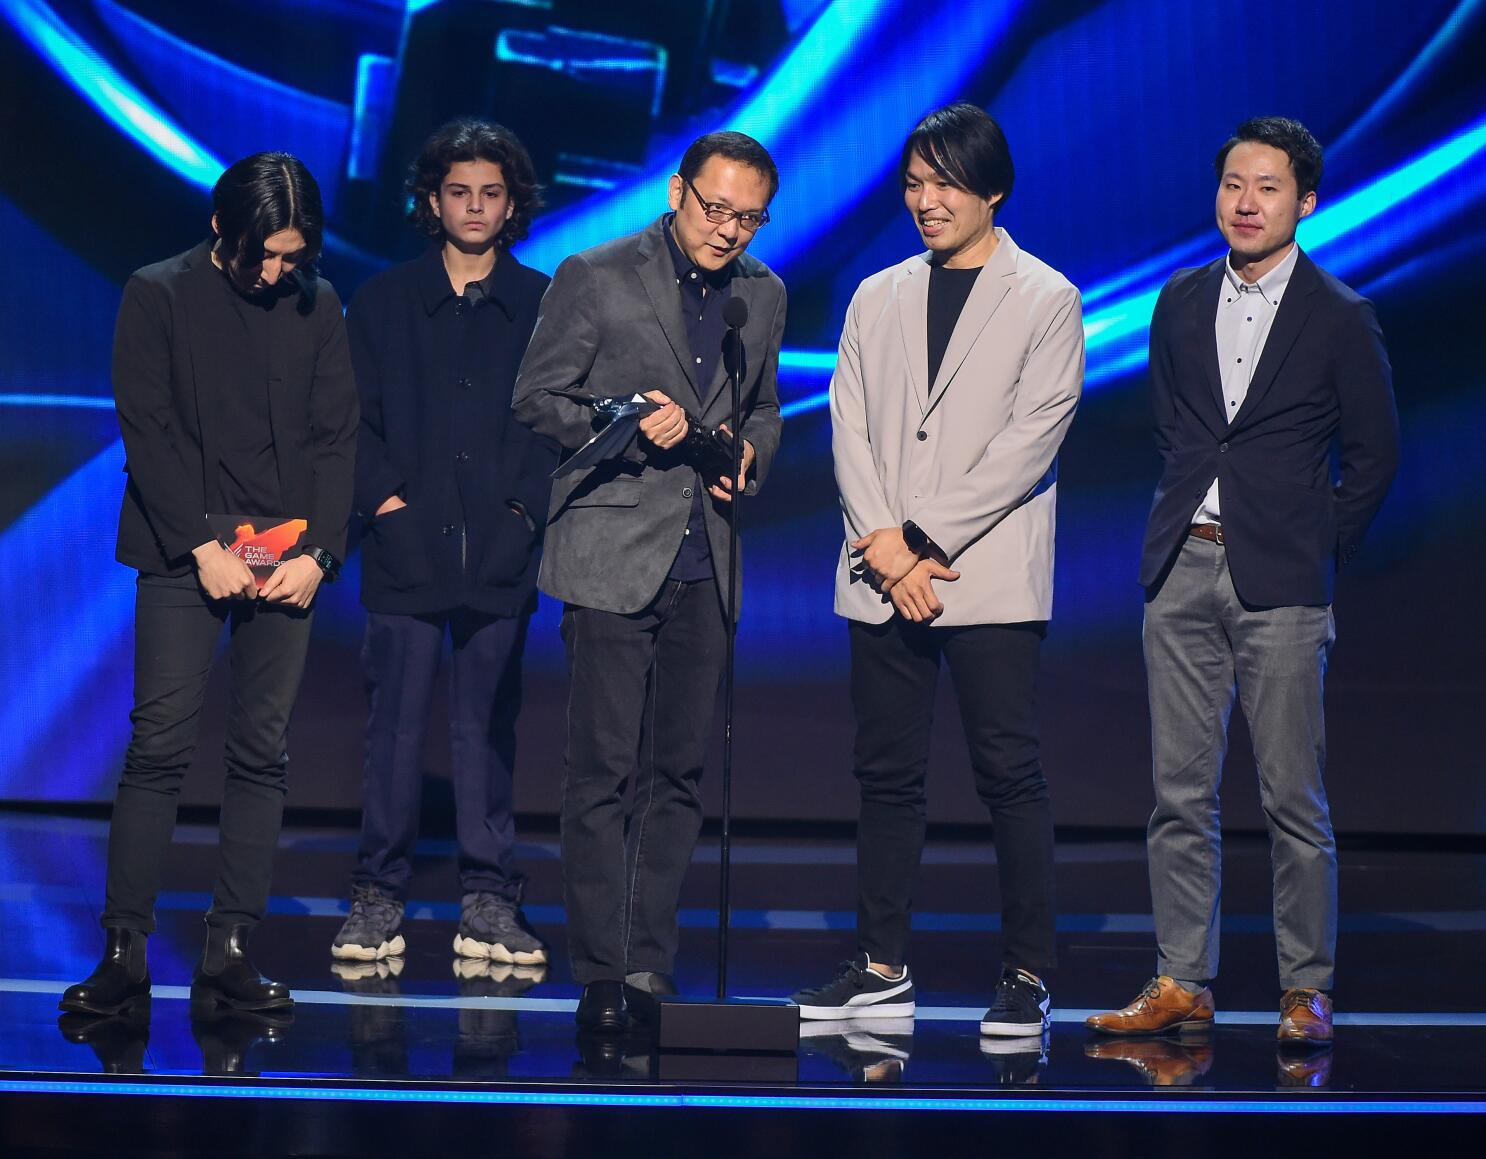 Winners & Best Announcements From The Game Awards 2020 – The Reformed Gamers